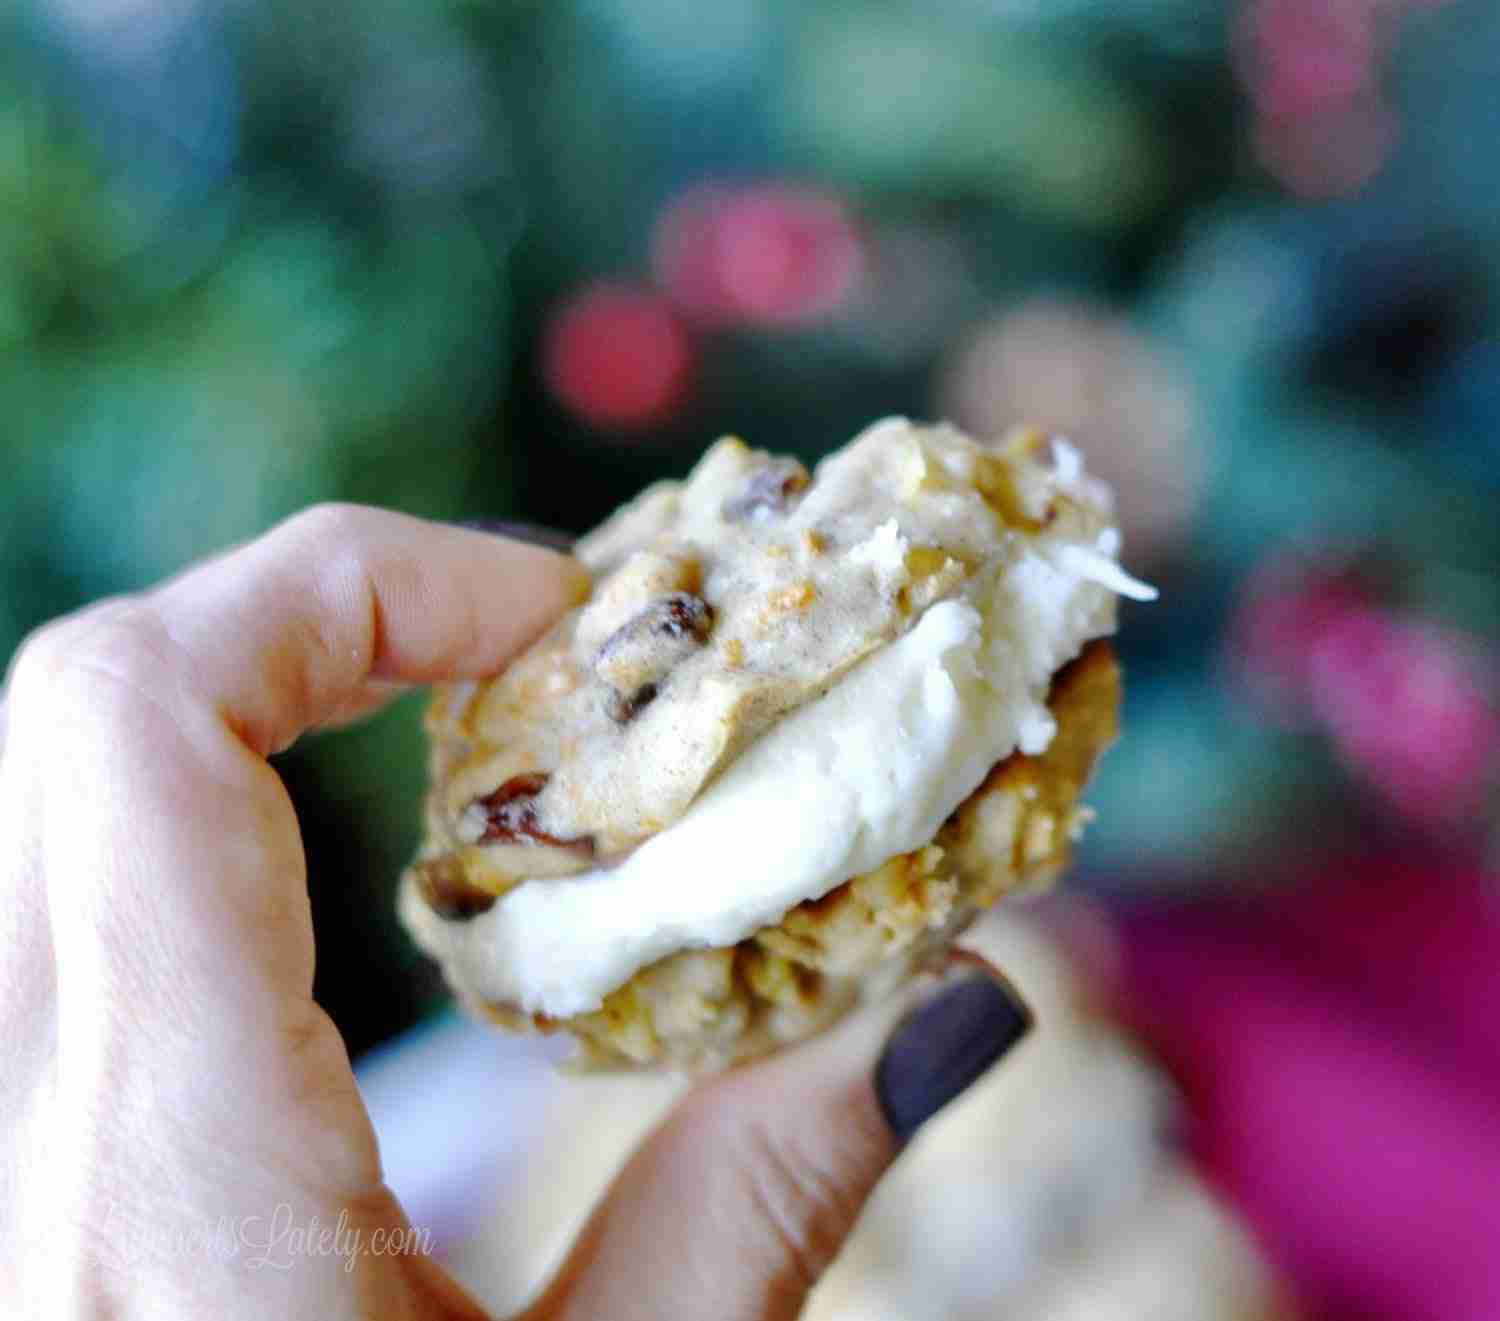 holding a carrot cake sandwich cookie with a bite missing.